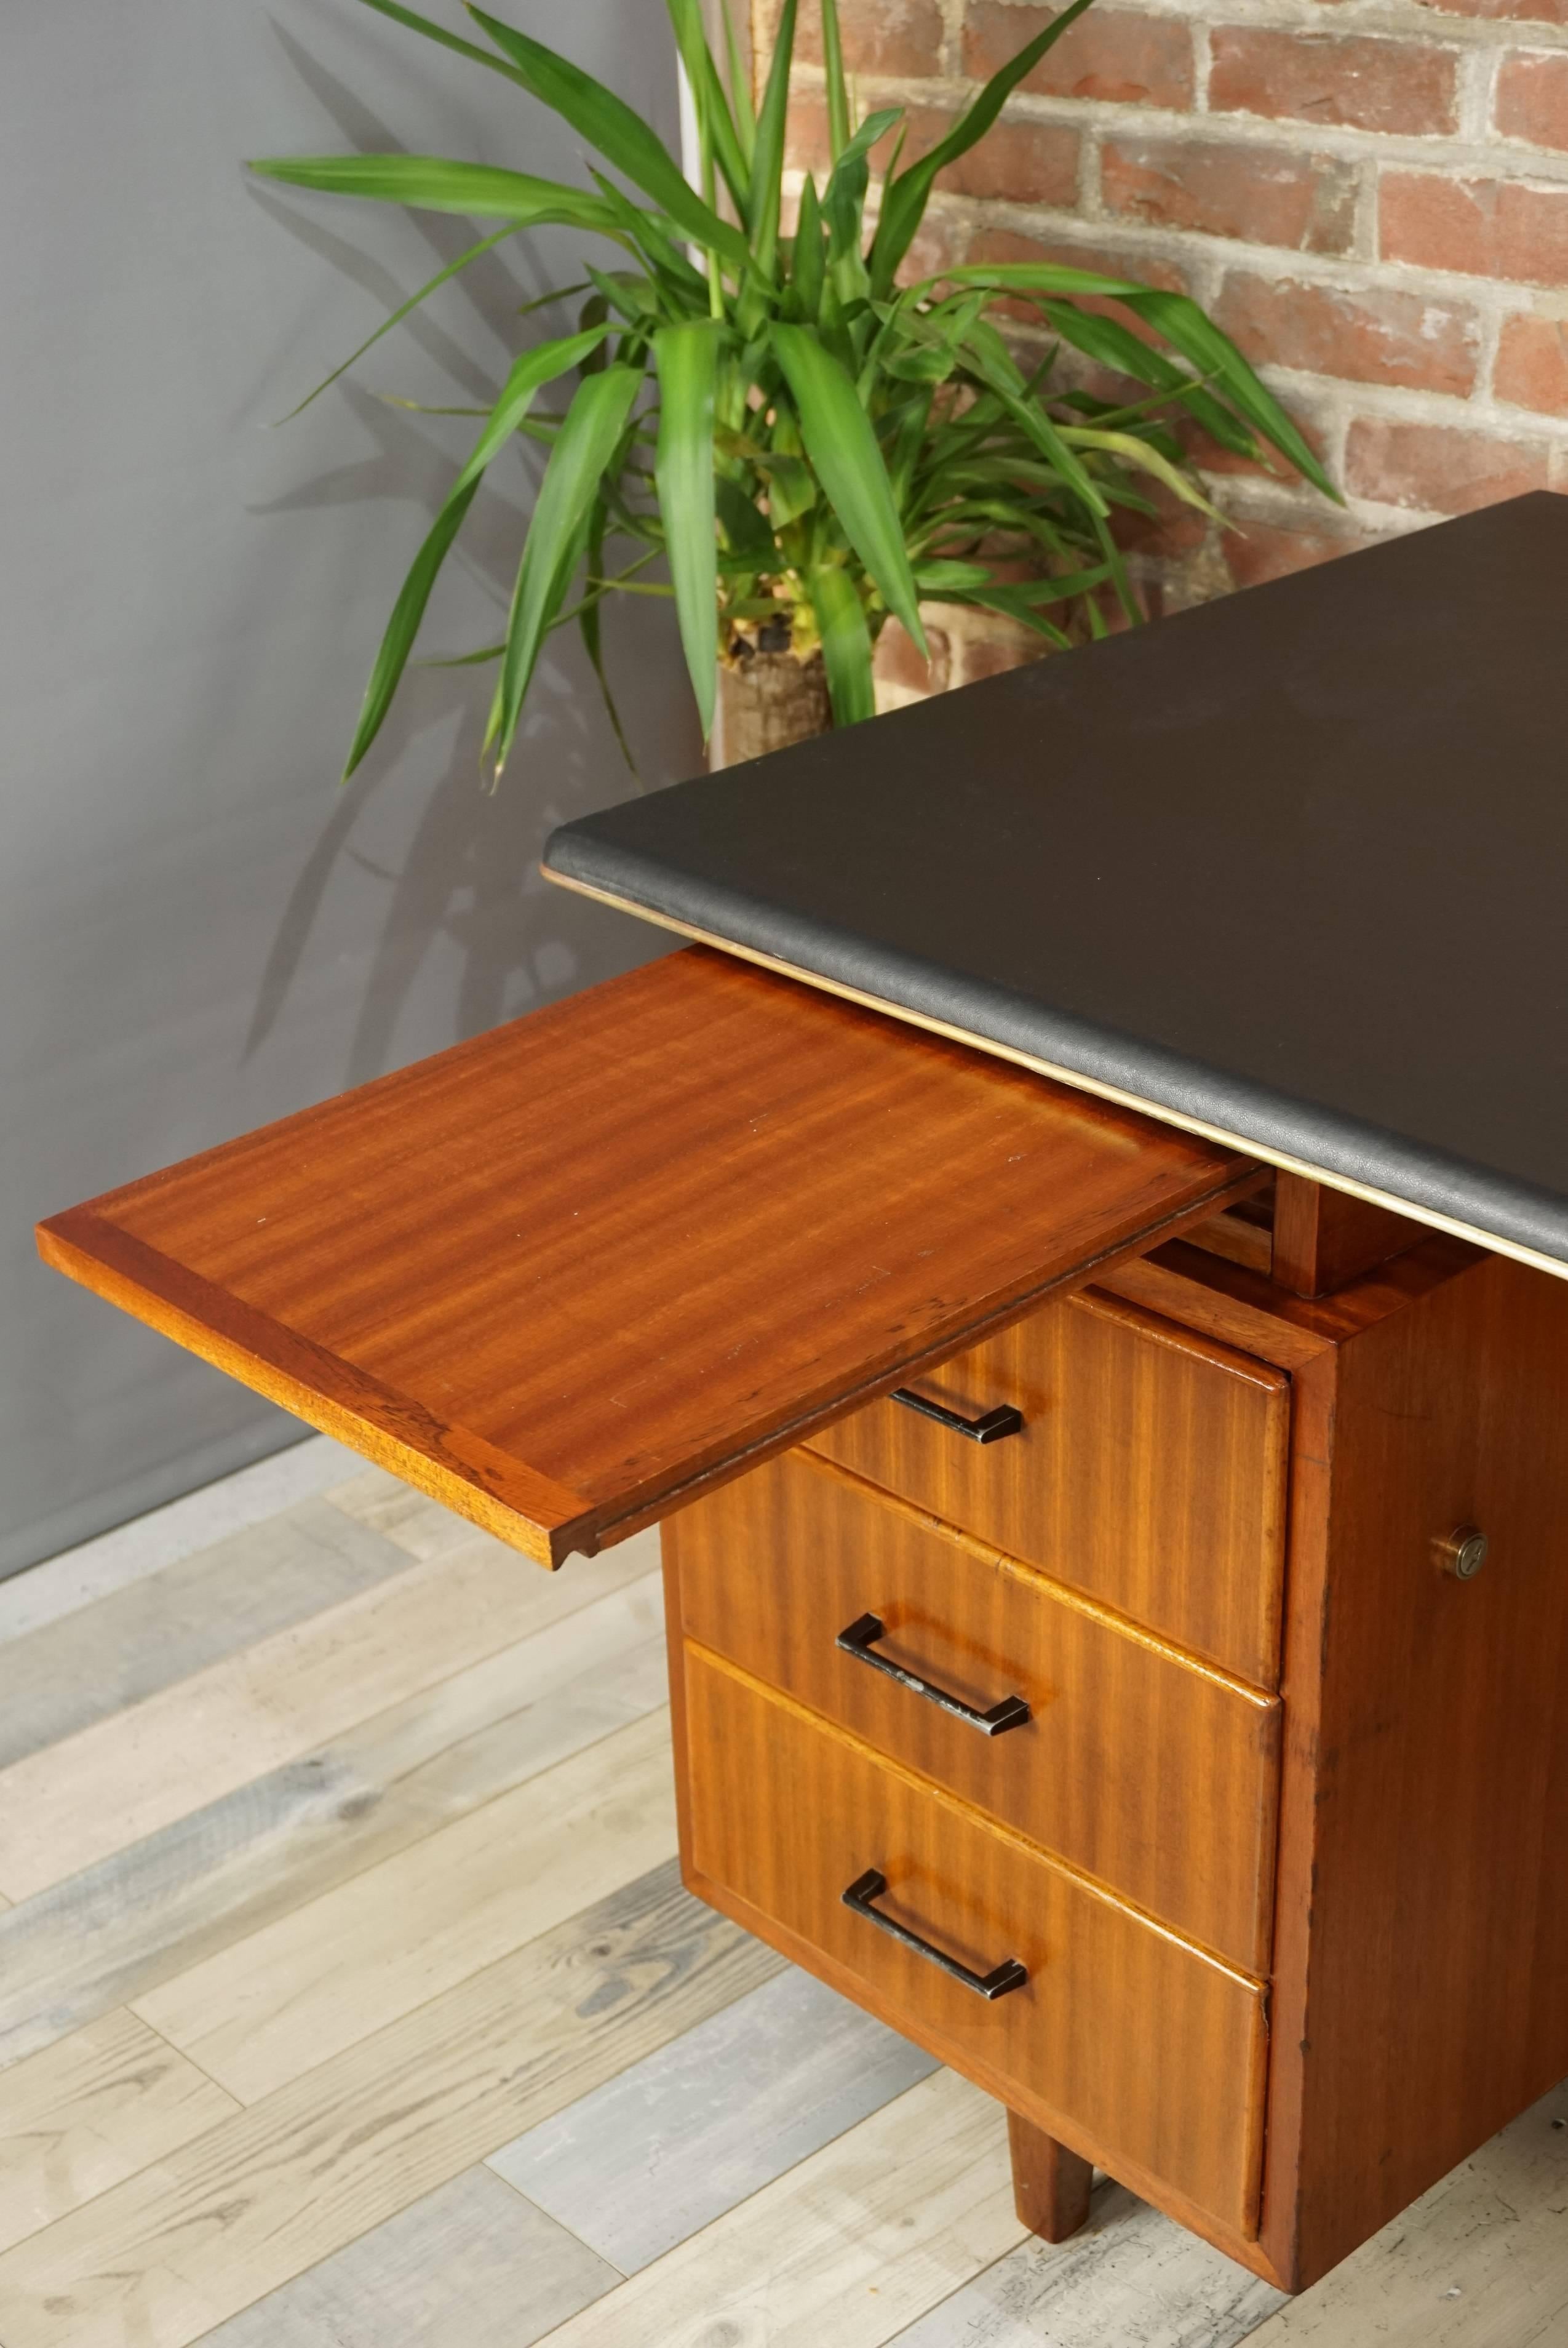 Faux Leather French Design Teak Wooden and Black Executive Desk from the 1950s by Burwood